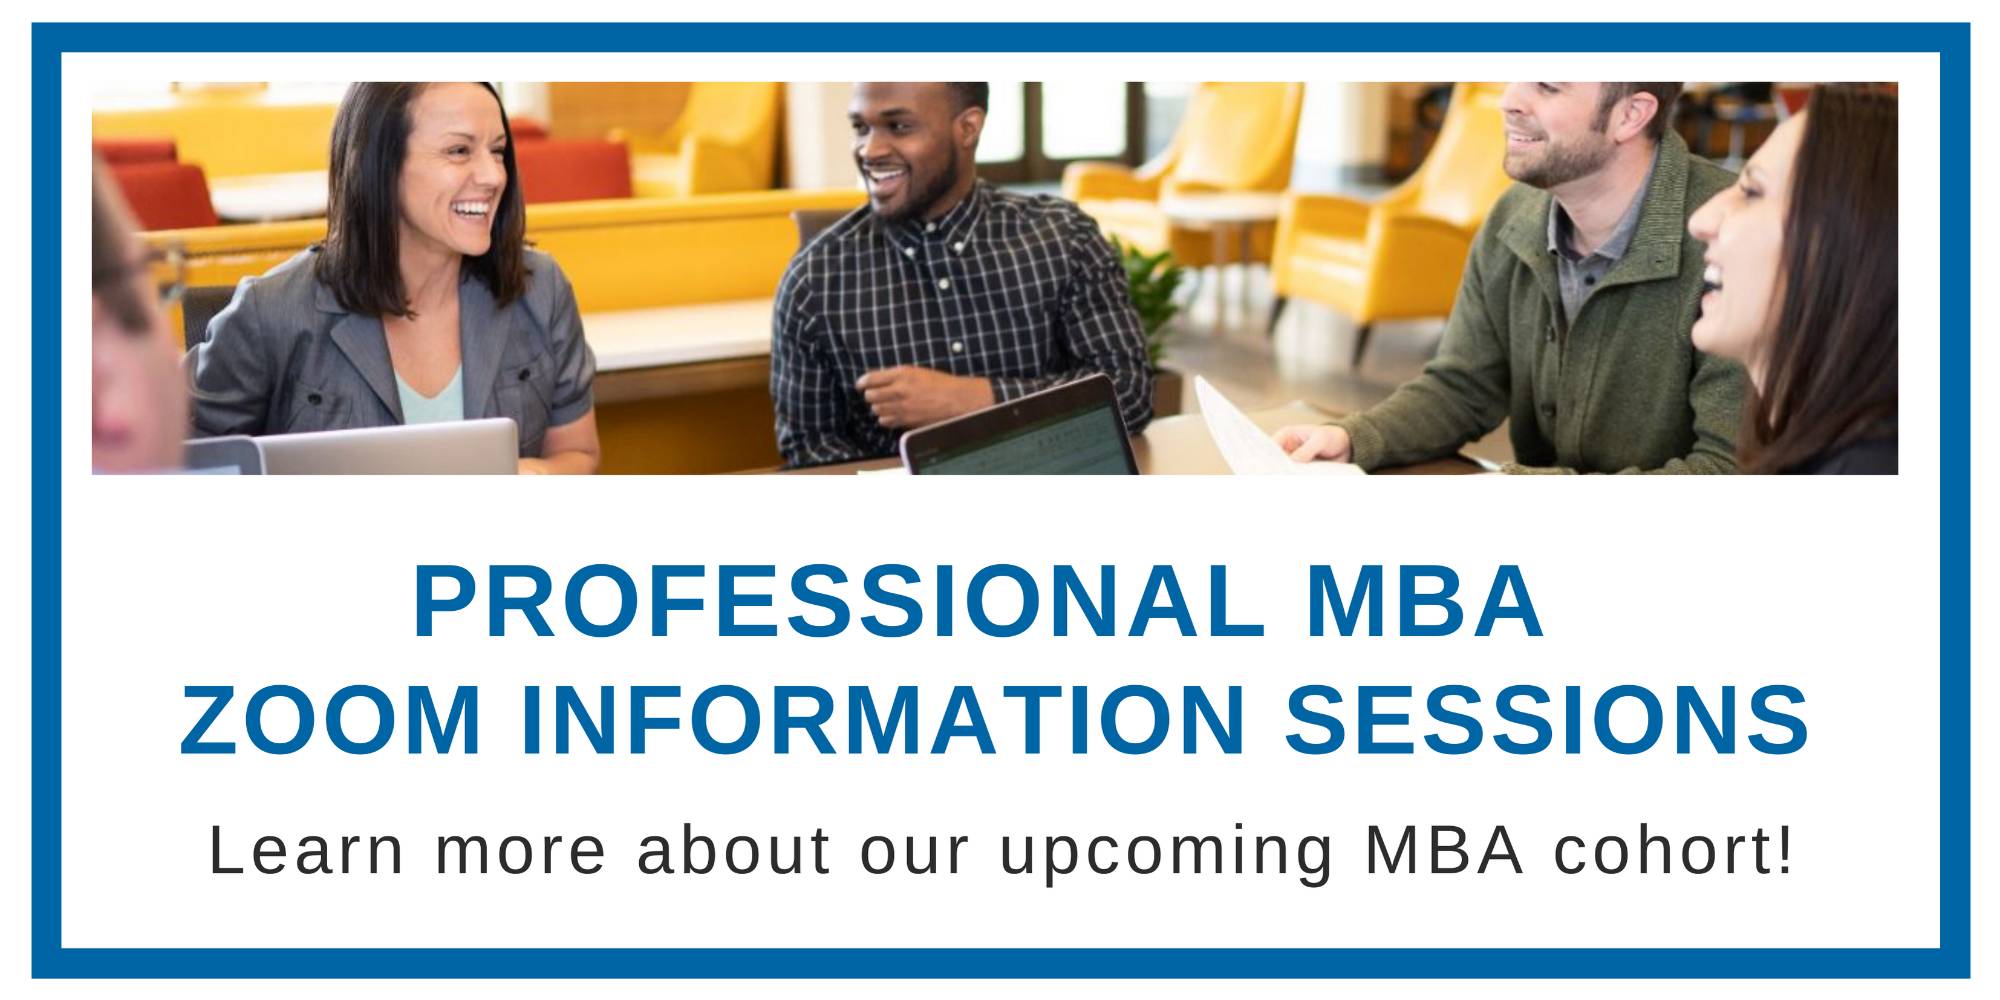 Professional MBA  Zoom information sessions, learn about our upcoming mba cohort